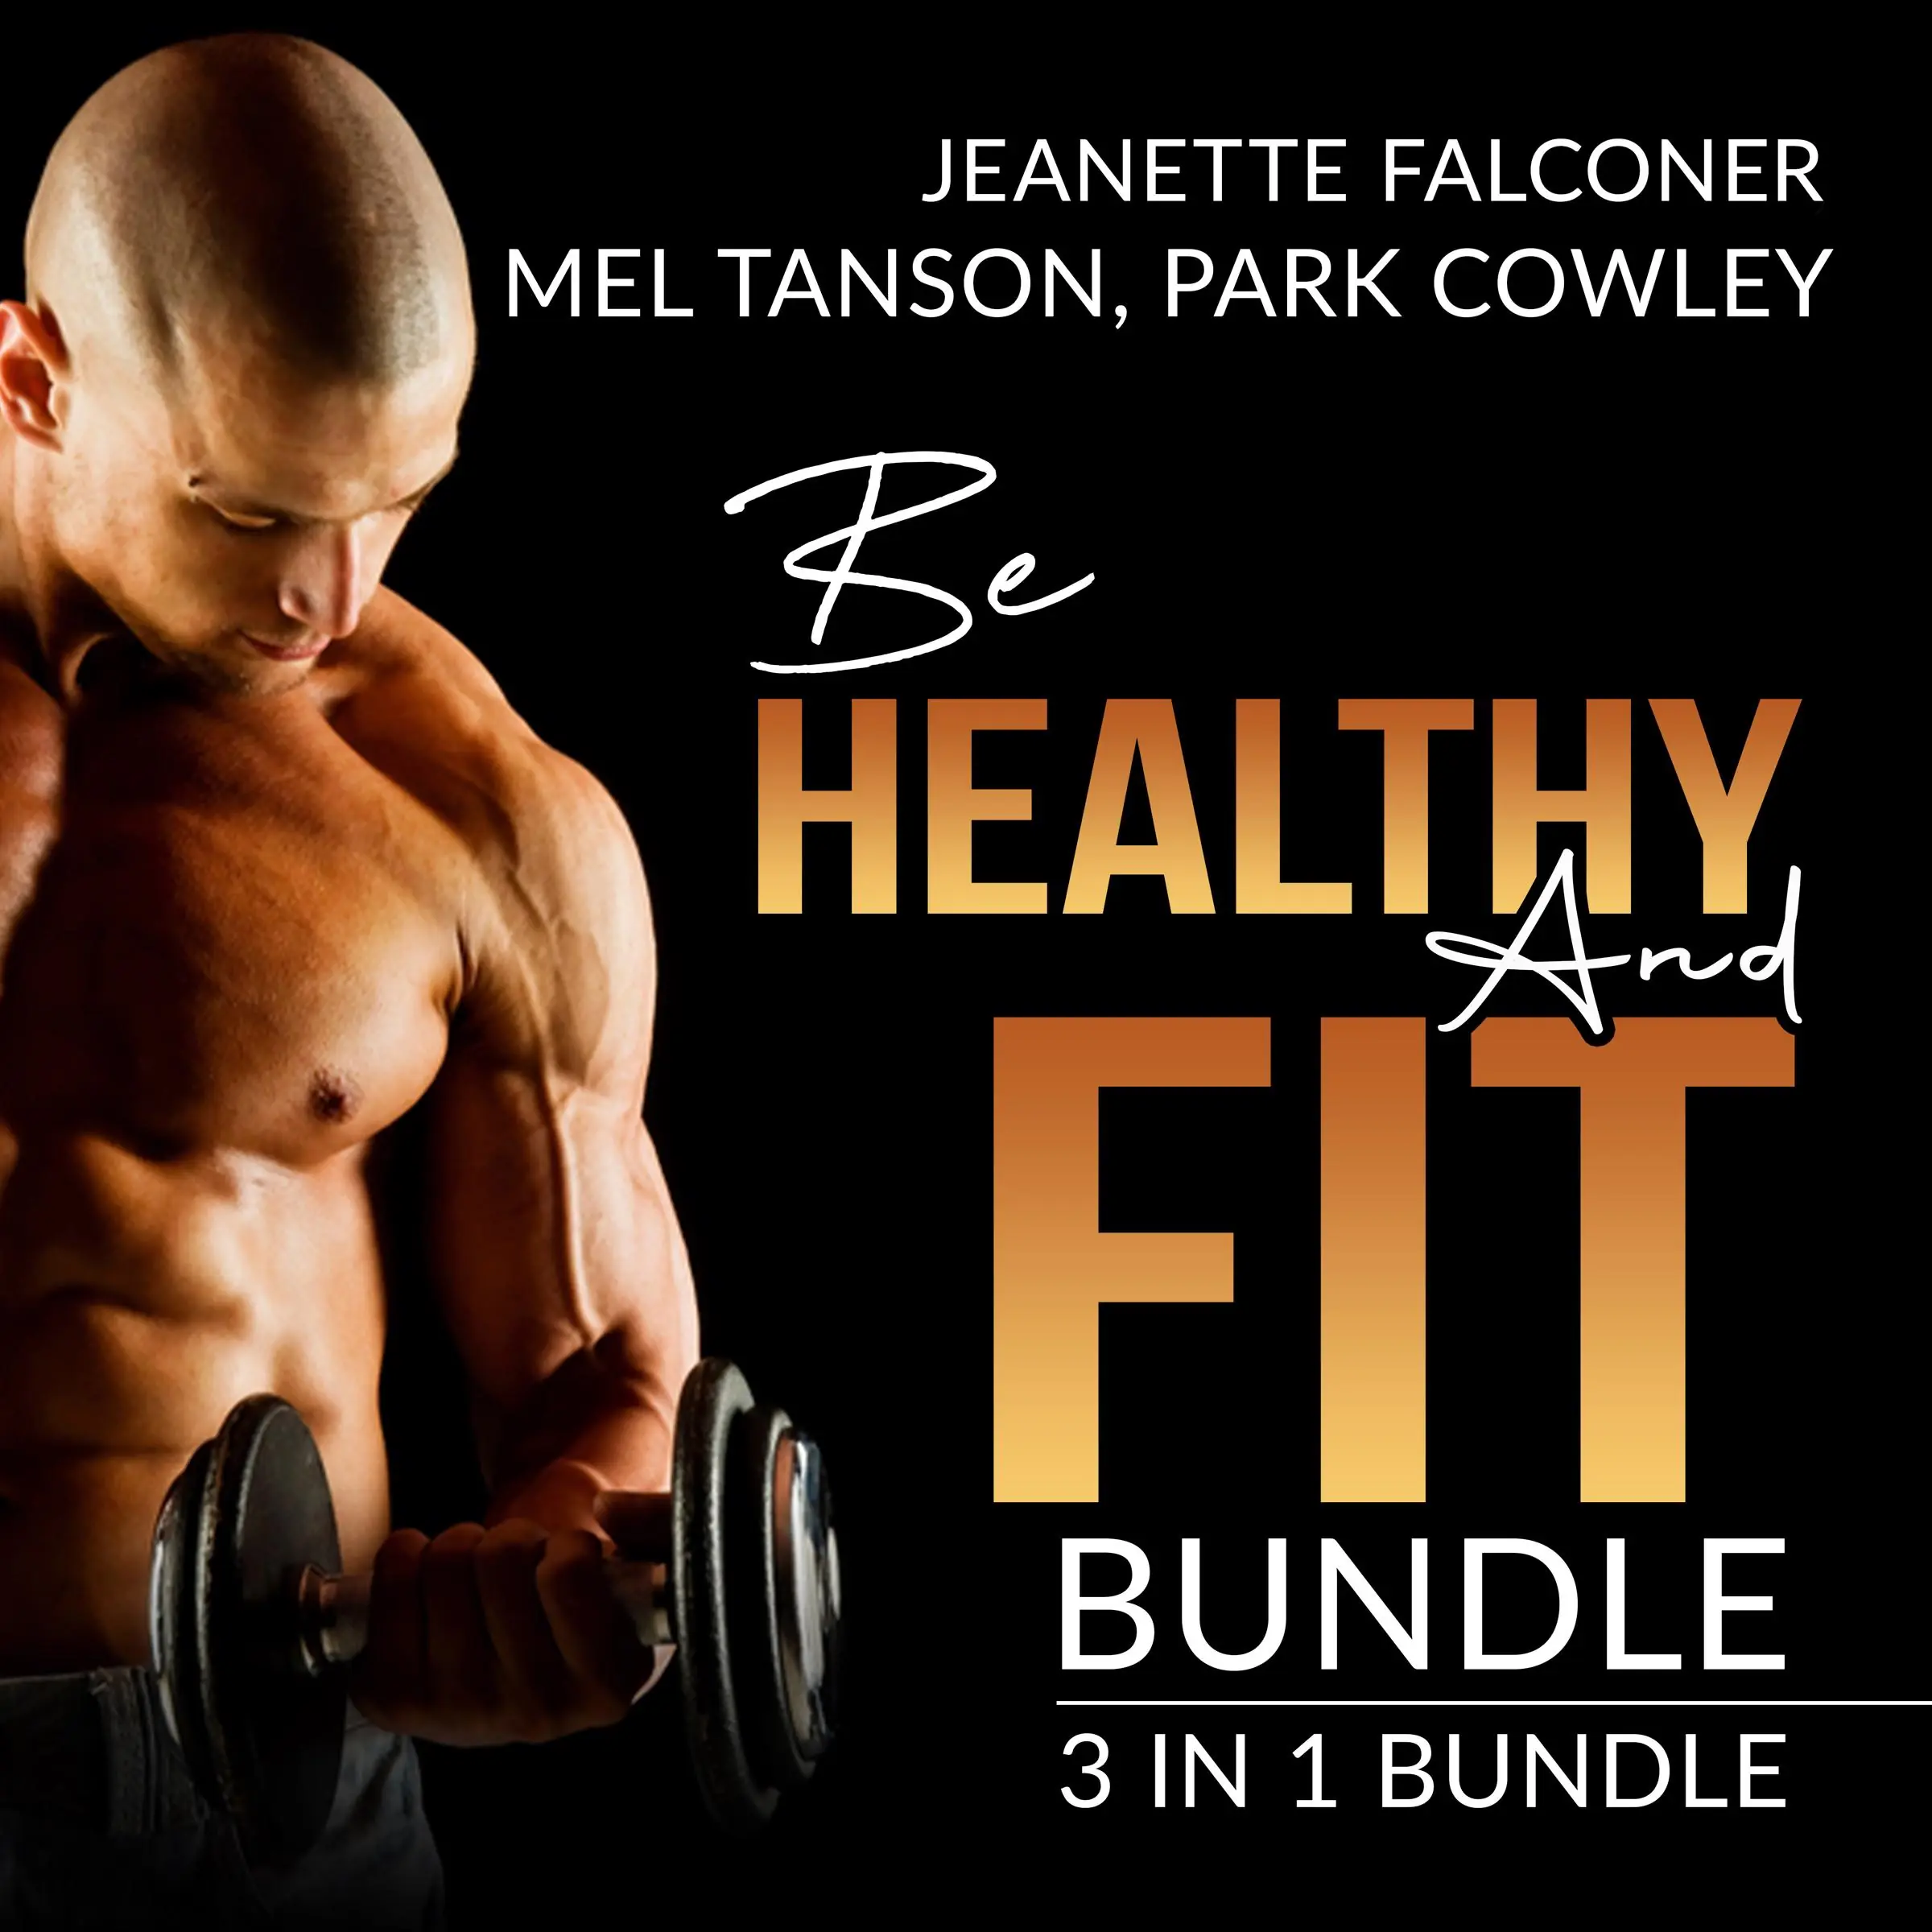 Be Healthy and Fit Bundle: 3 in 1 Bundle, Fast Metabolism Diet Plan, Carb Counting, and Abs Diet Audiobook by Mel Tanson and Park Cowley